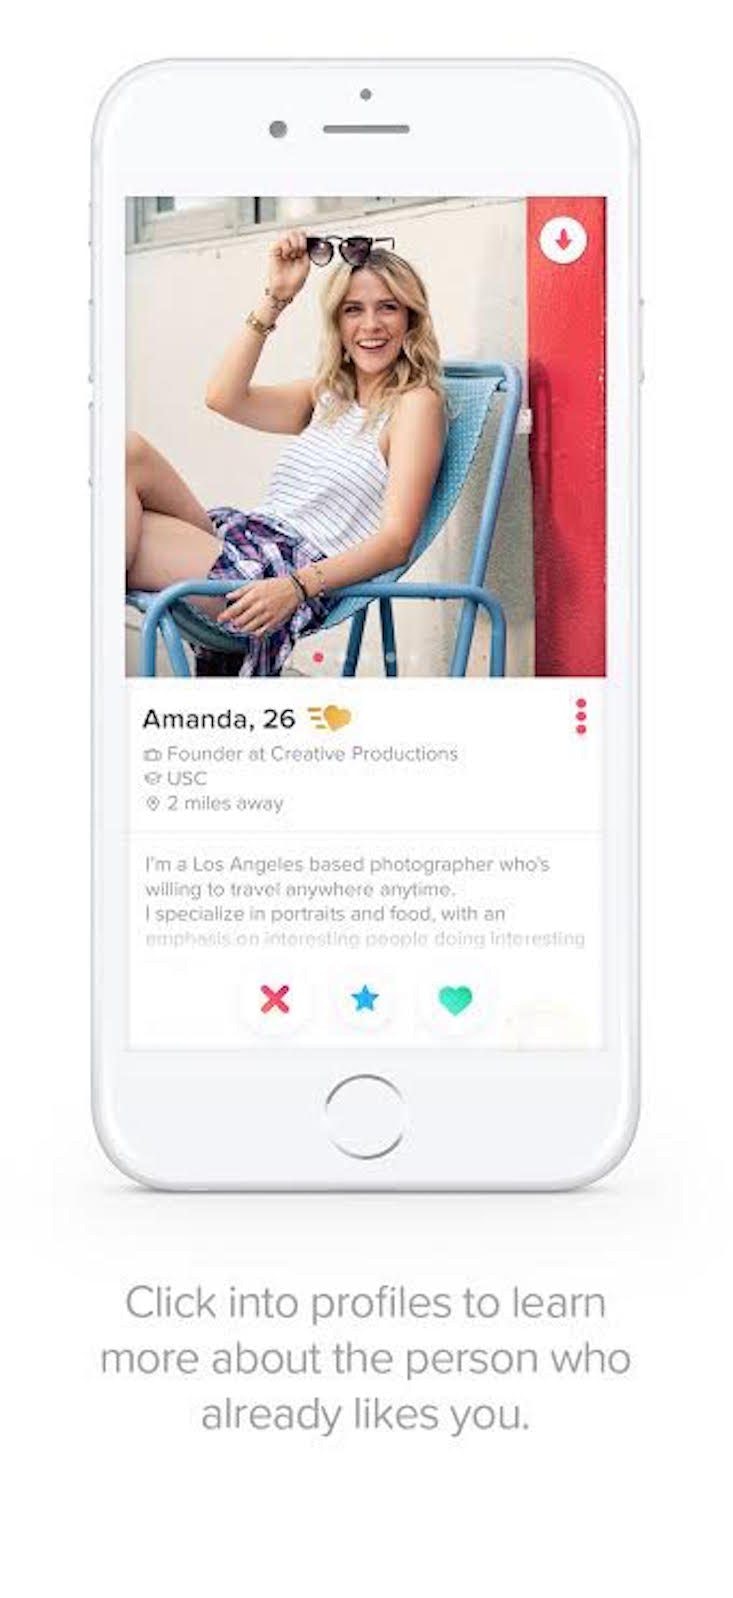 Tinder Bios for Guys: Grab Her Attention with These Top Bio Tips